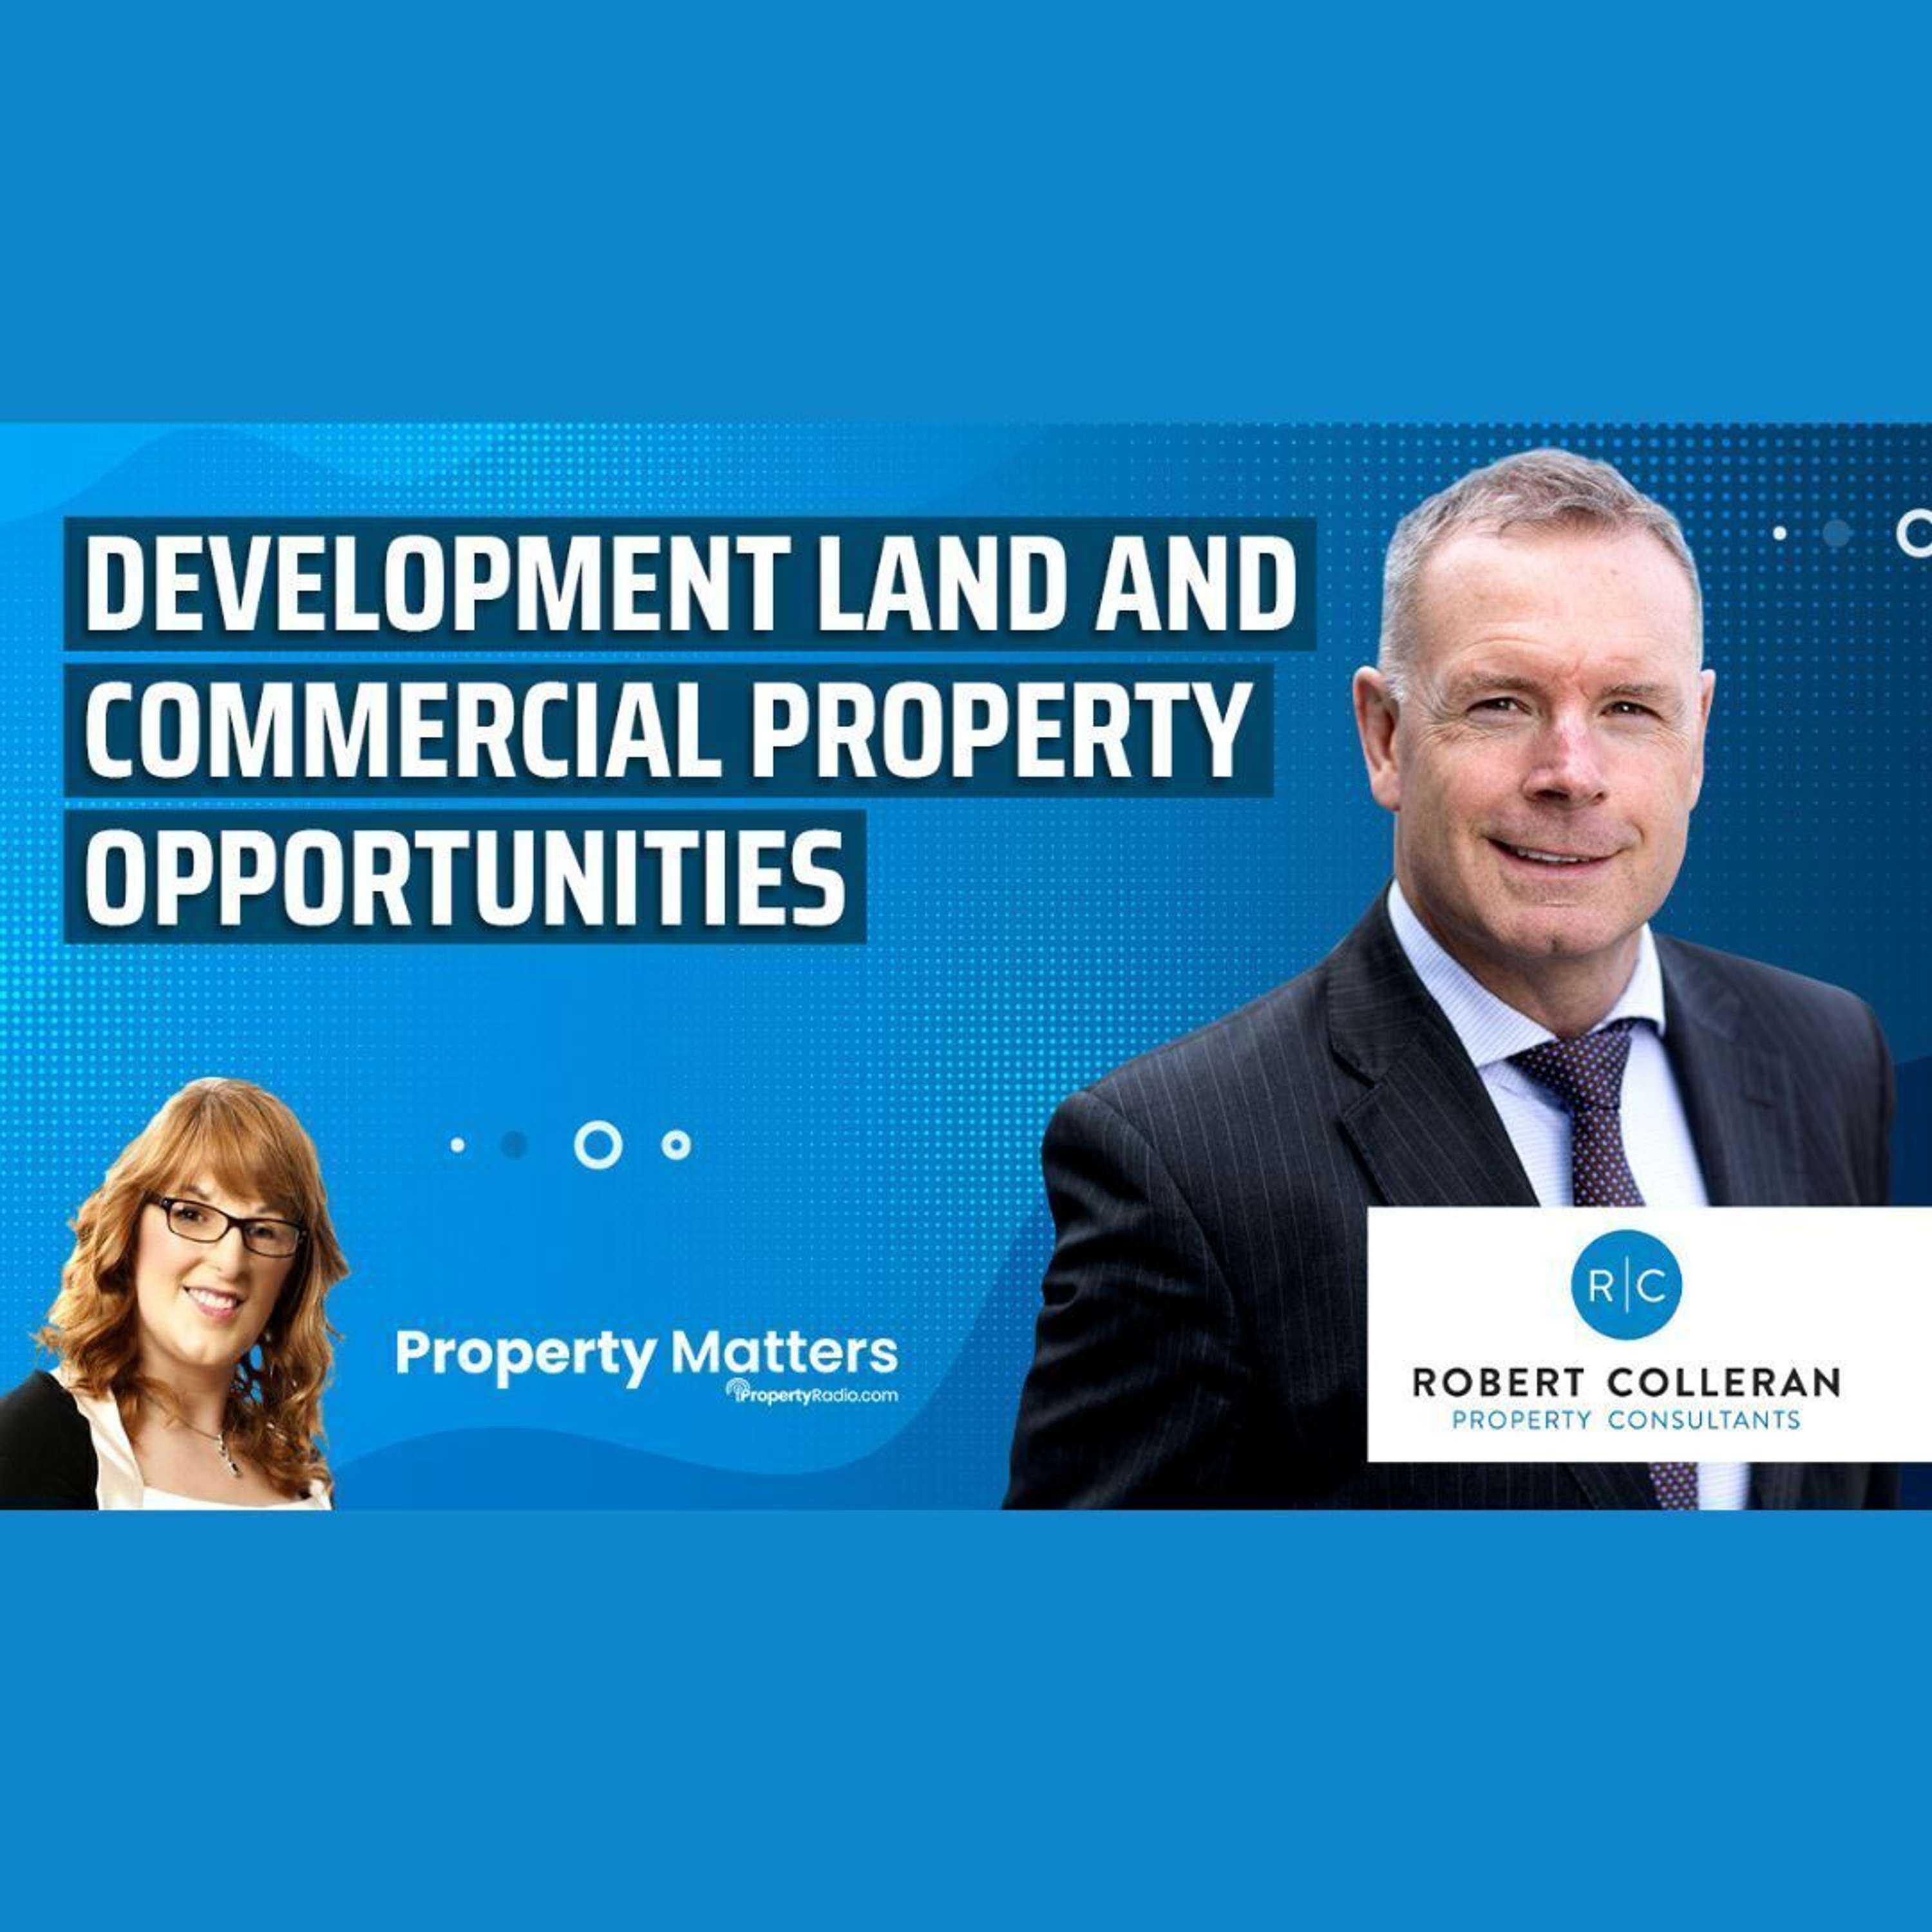 Development land and commercial property opportunities